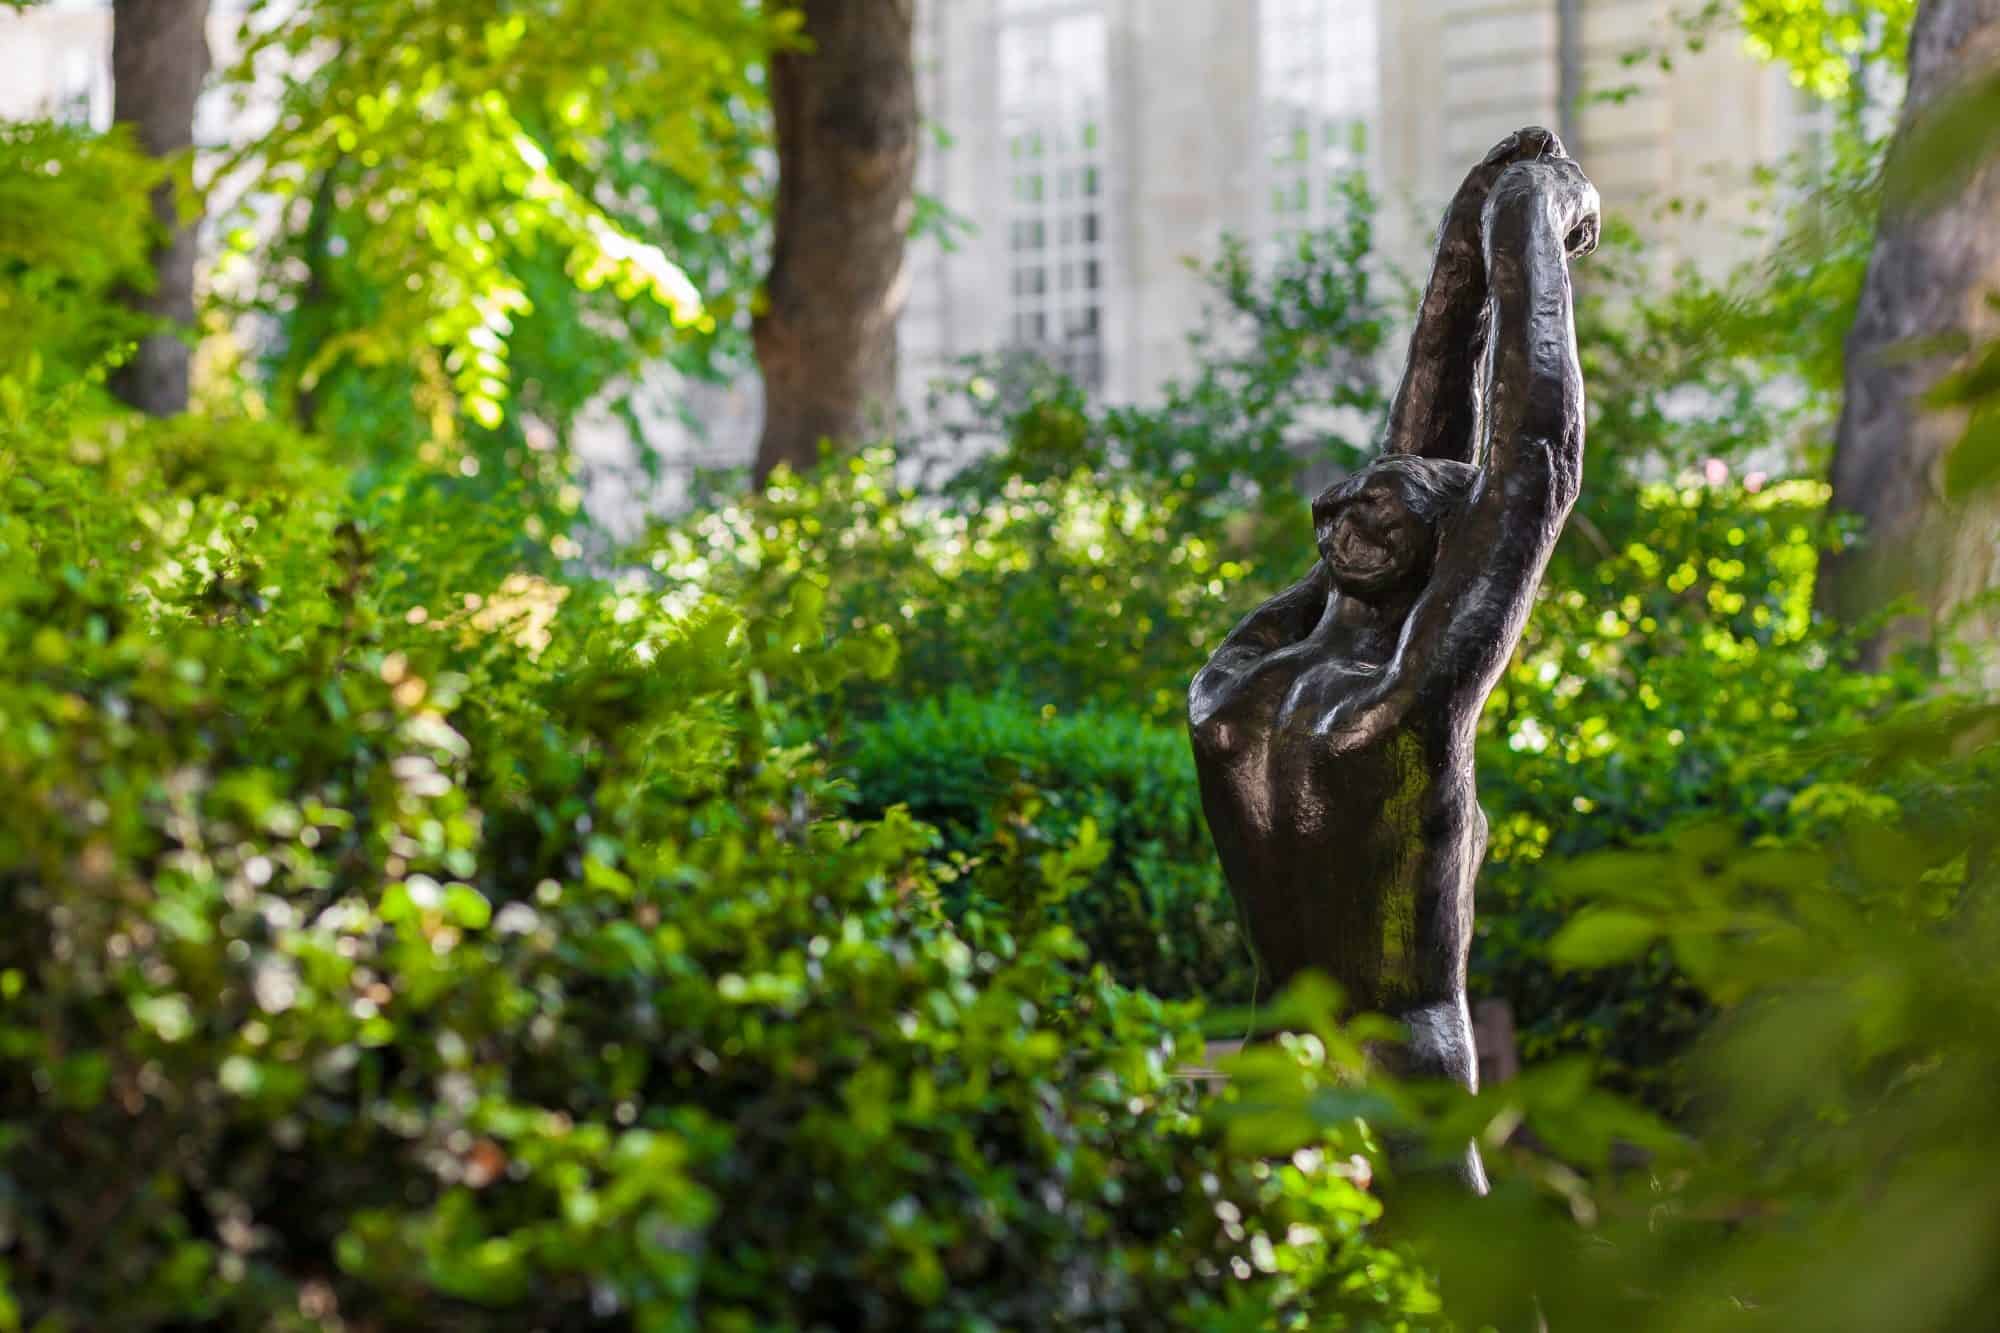 The Rodin Museum gardens with a sculpture of a woman her arms up among the foliage (right).